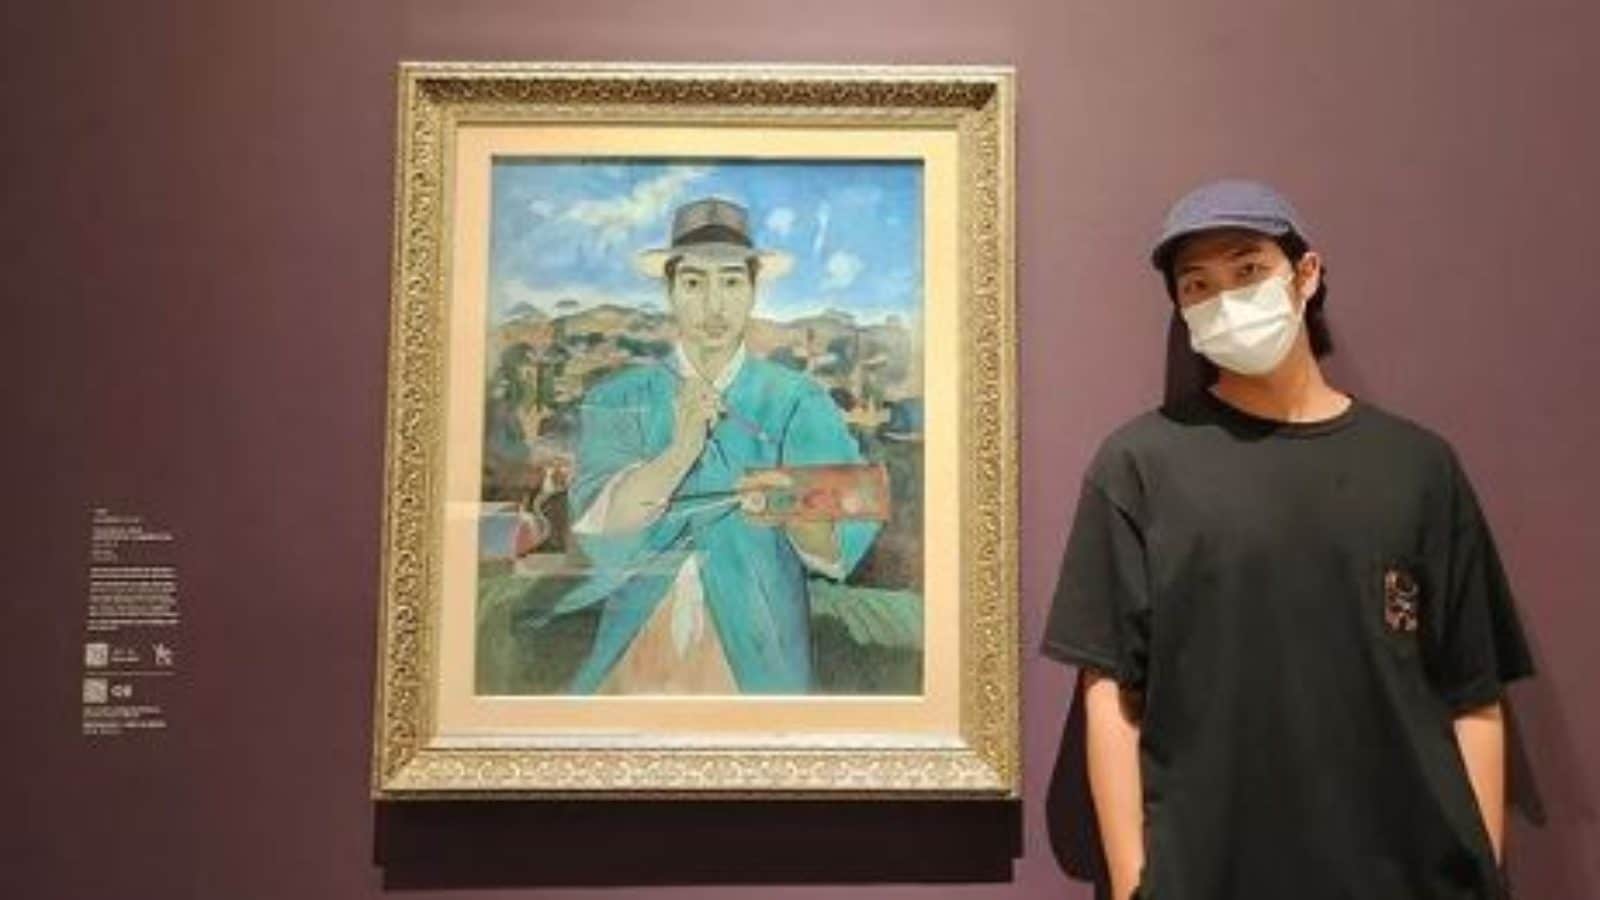 PHOTOS] BTS at the MET Museum (SEPT 2021) — US BTS ARMY